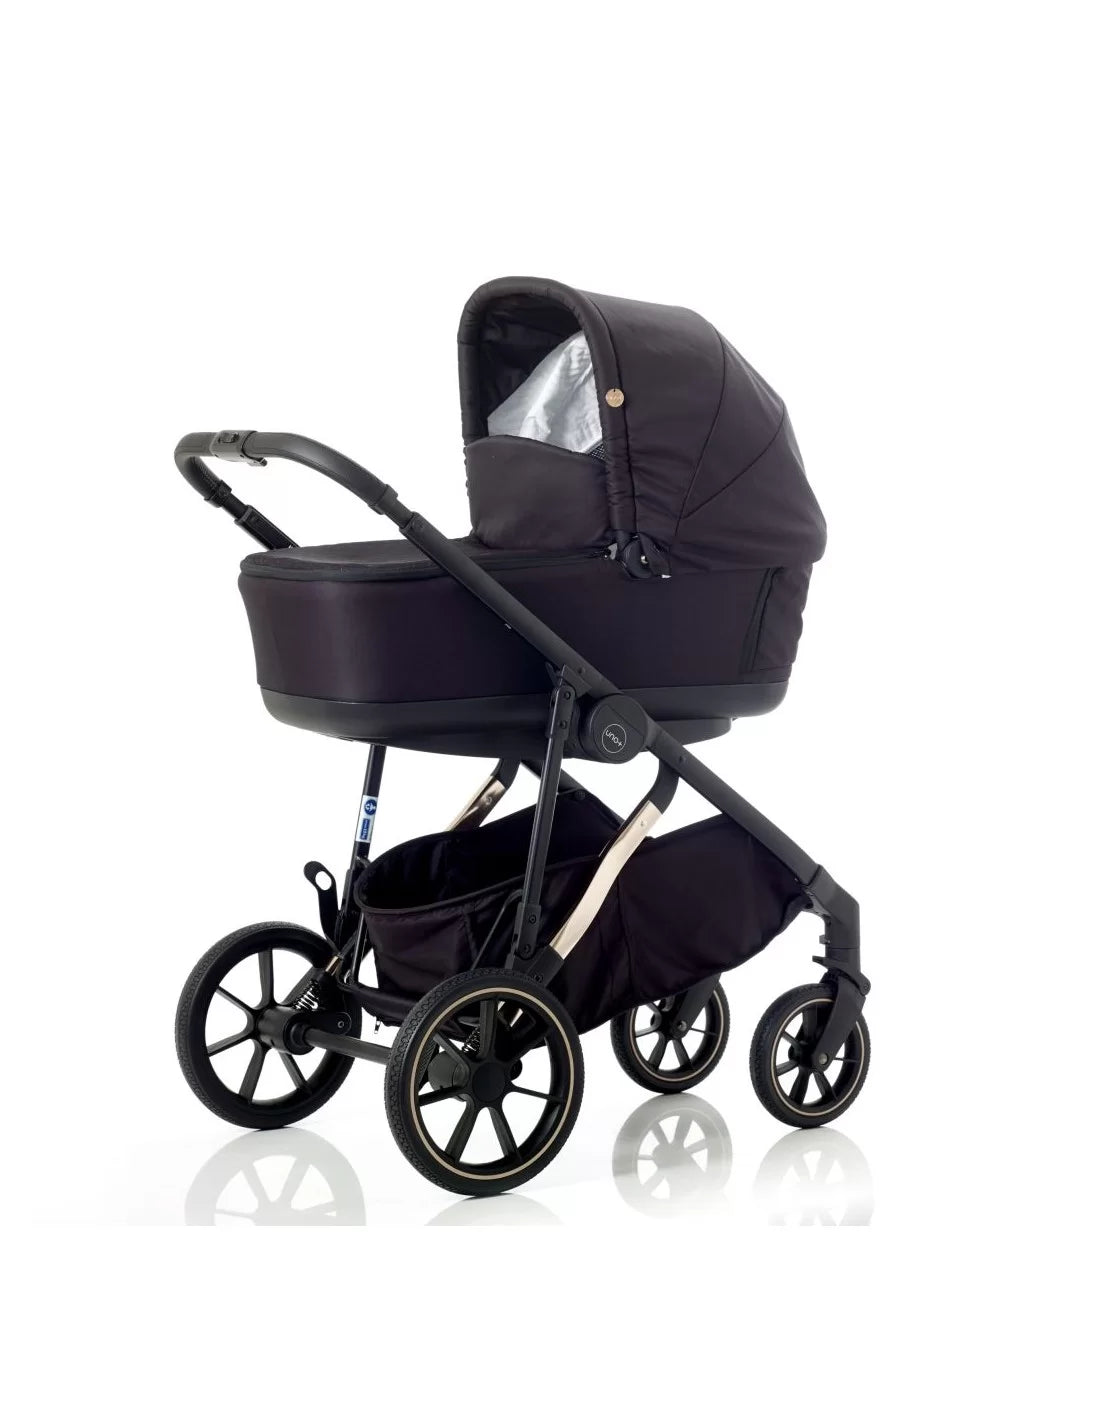 Mee-Go Uno Plus Carry Cot - Black/Rose - For Your Little One